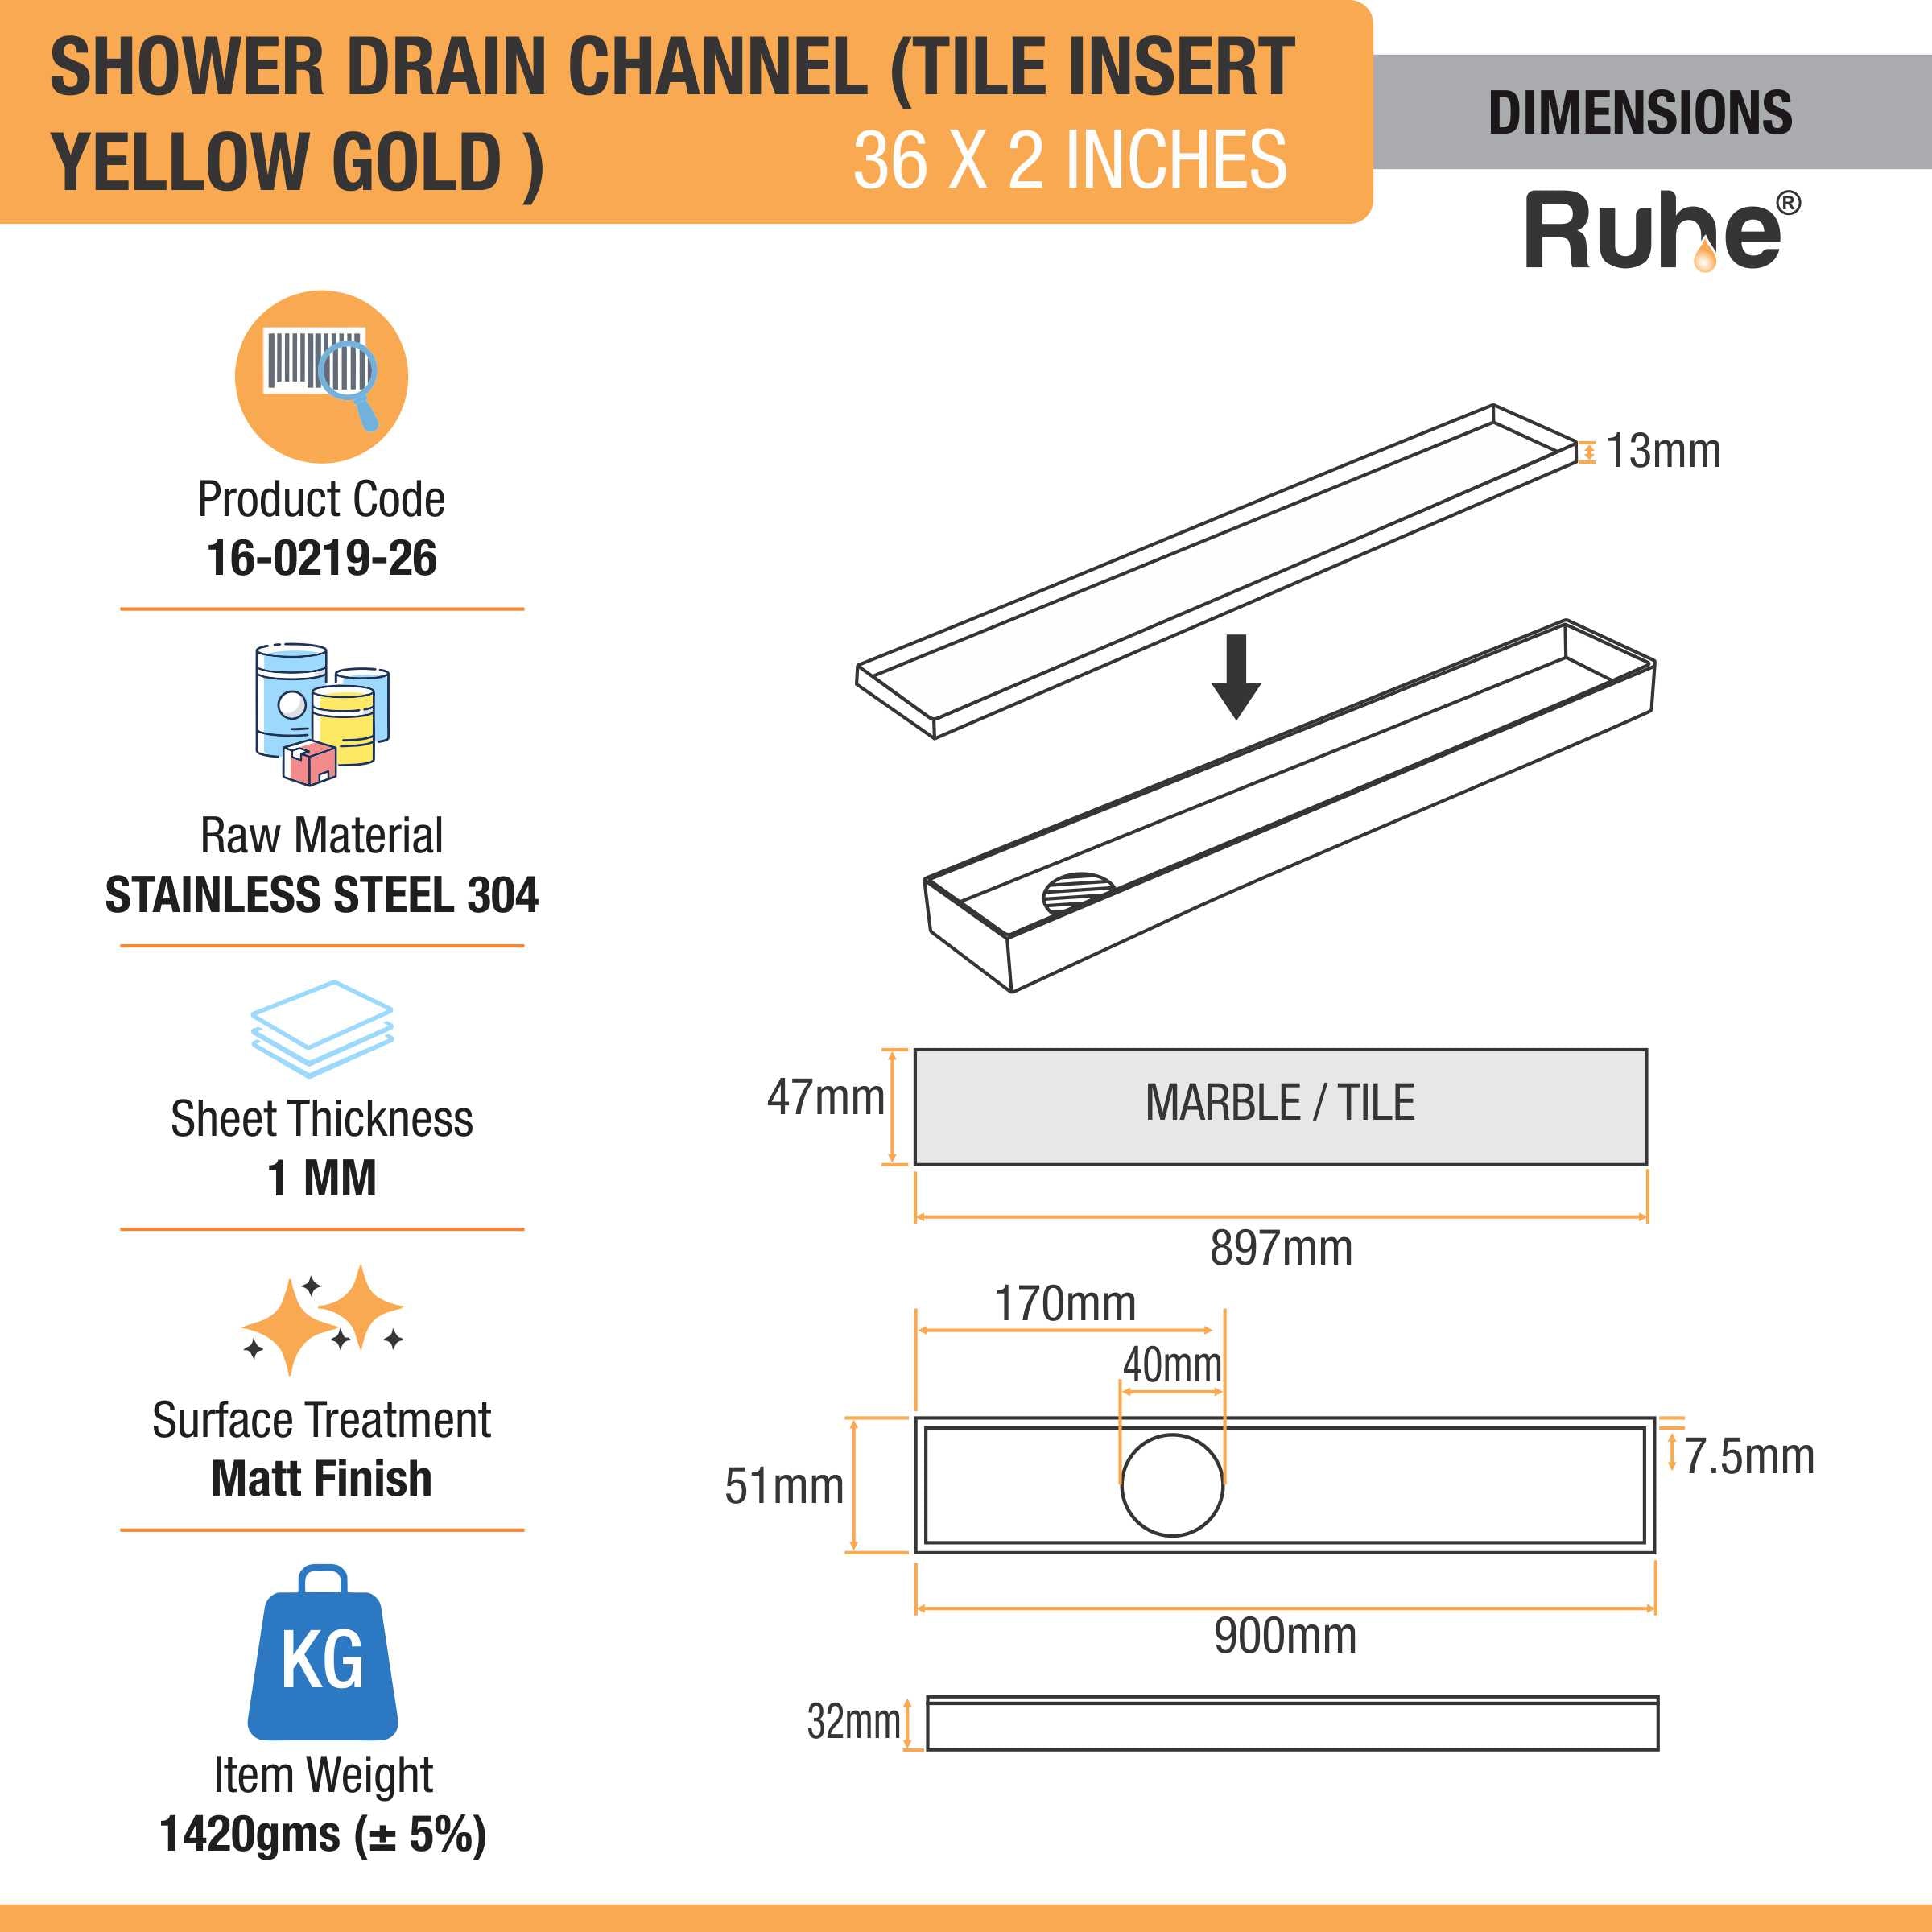 Tile Insert Shower Drain Channel (36 x 2 Inches) YELLOW GOLD dimensions and size